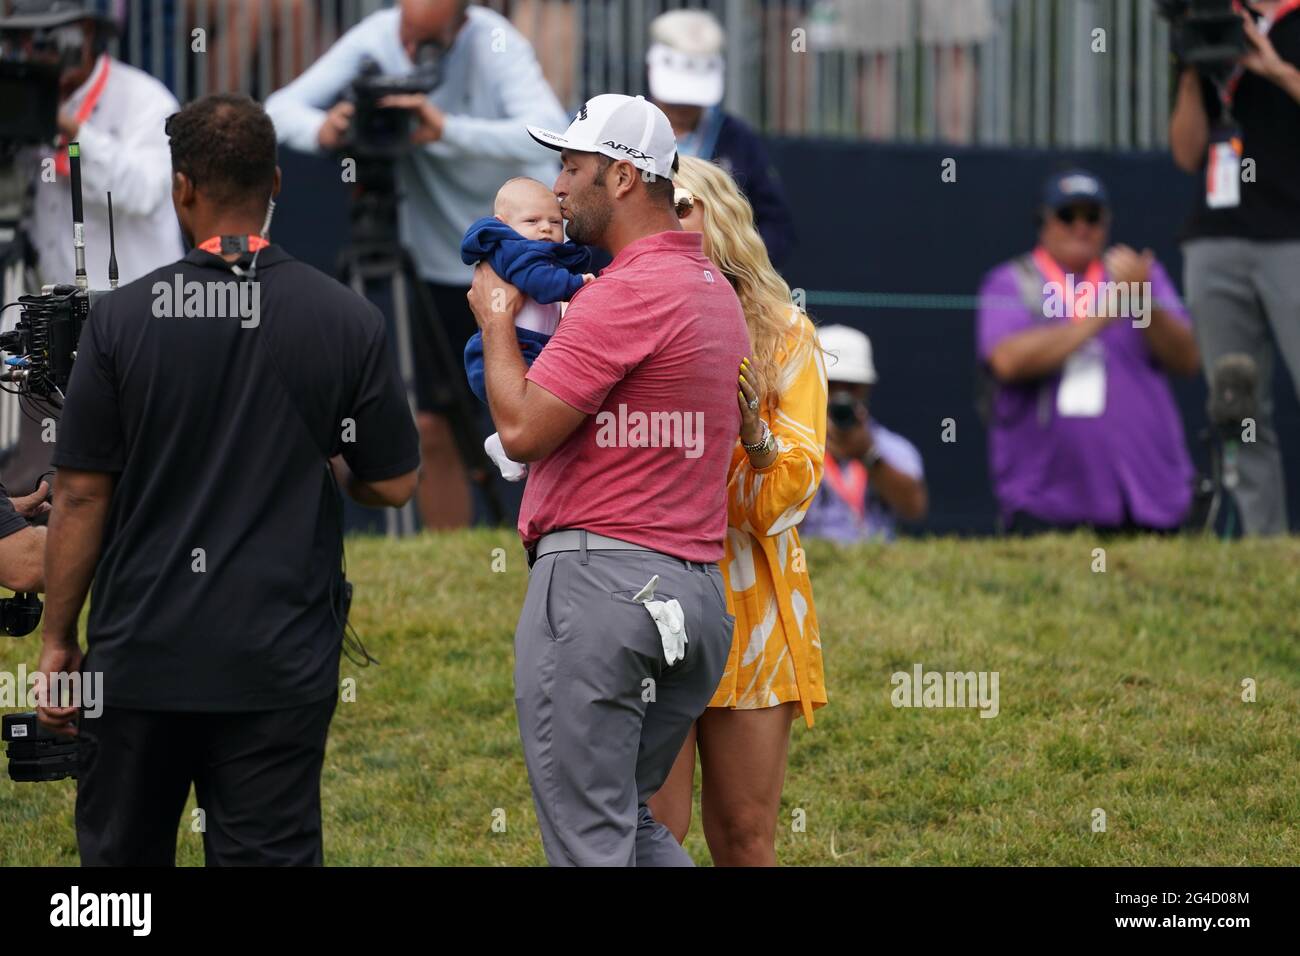 Jon Rahm is met by his wife Kelley Cahill and son Kepa on the 18th hole during the fourth round of the 2021 U.S. Open Championship in golf at Torrey Pines Golf Course in San Diego, California, USA on June 20, 2021. Credit: J.D. Cuban/AFLO/Alamy Live News Stock Photo